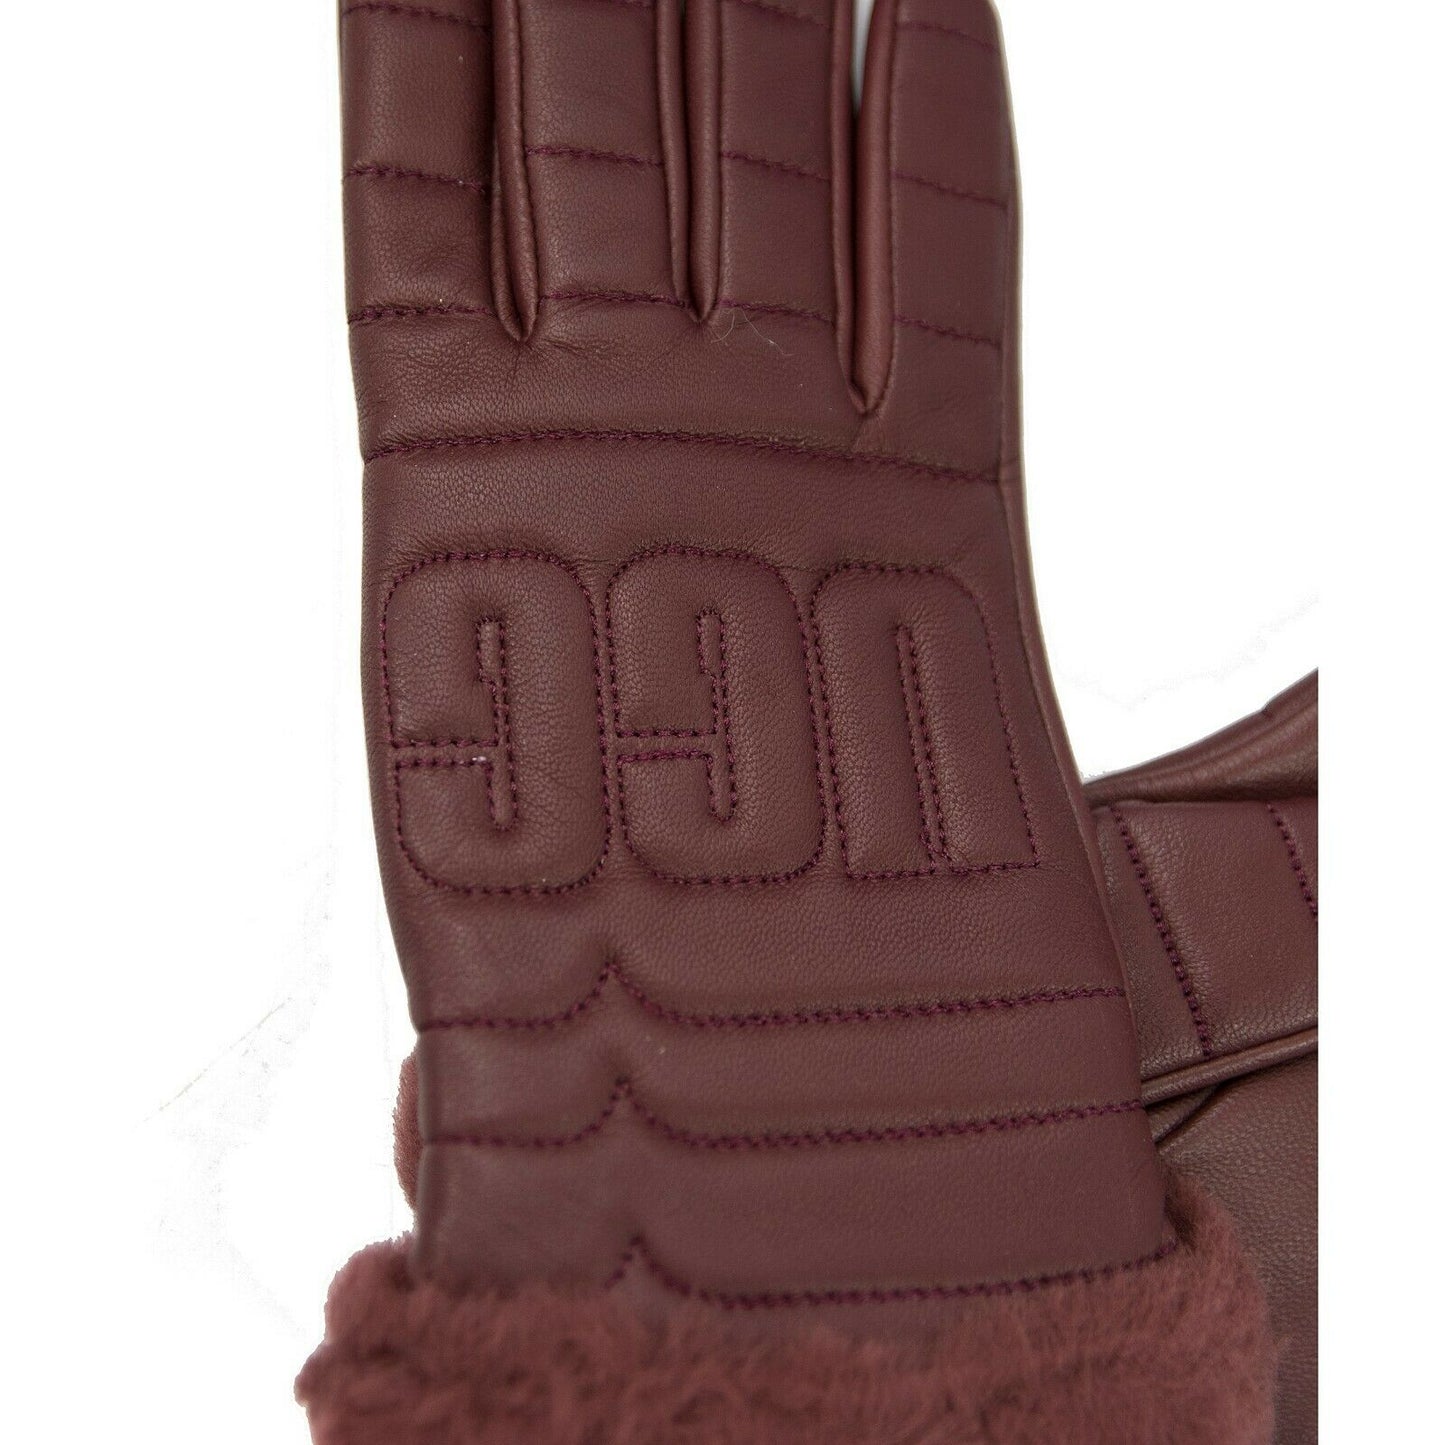 Ugg Burgundy Quilted Leather Conductive Tech Palm Shearling Fur Gloves Large